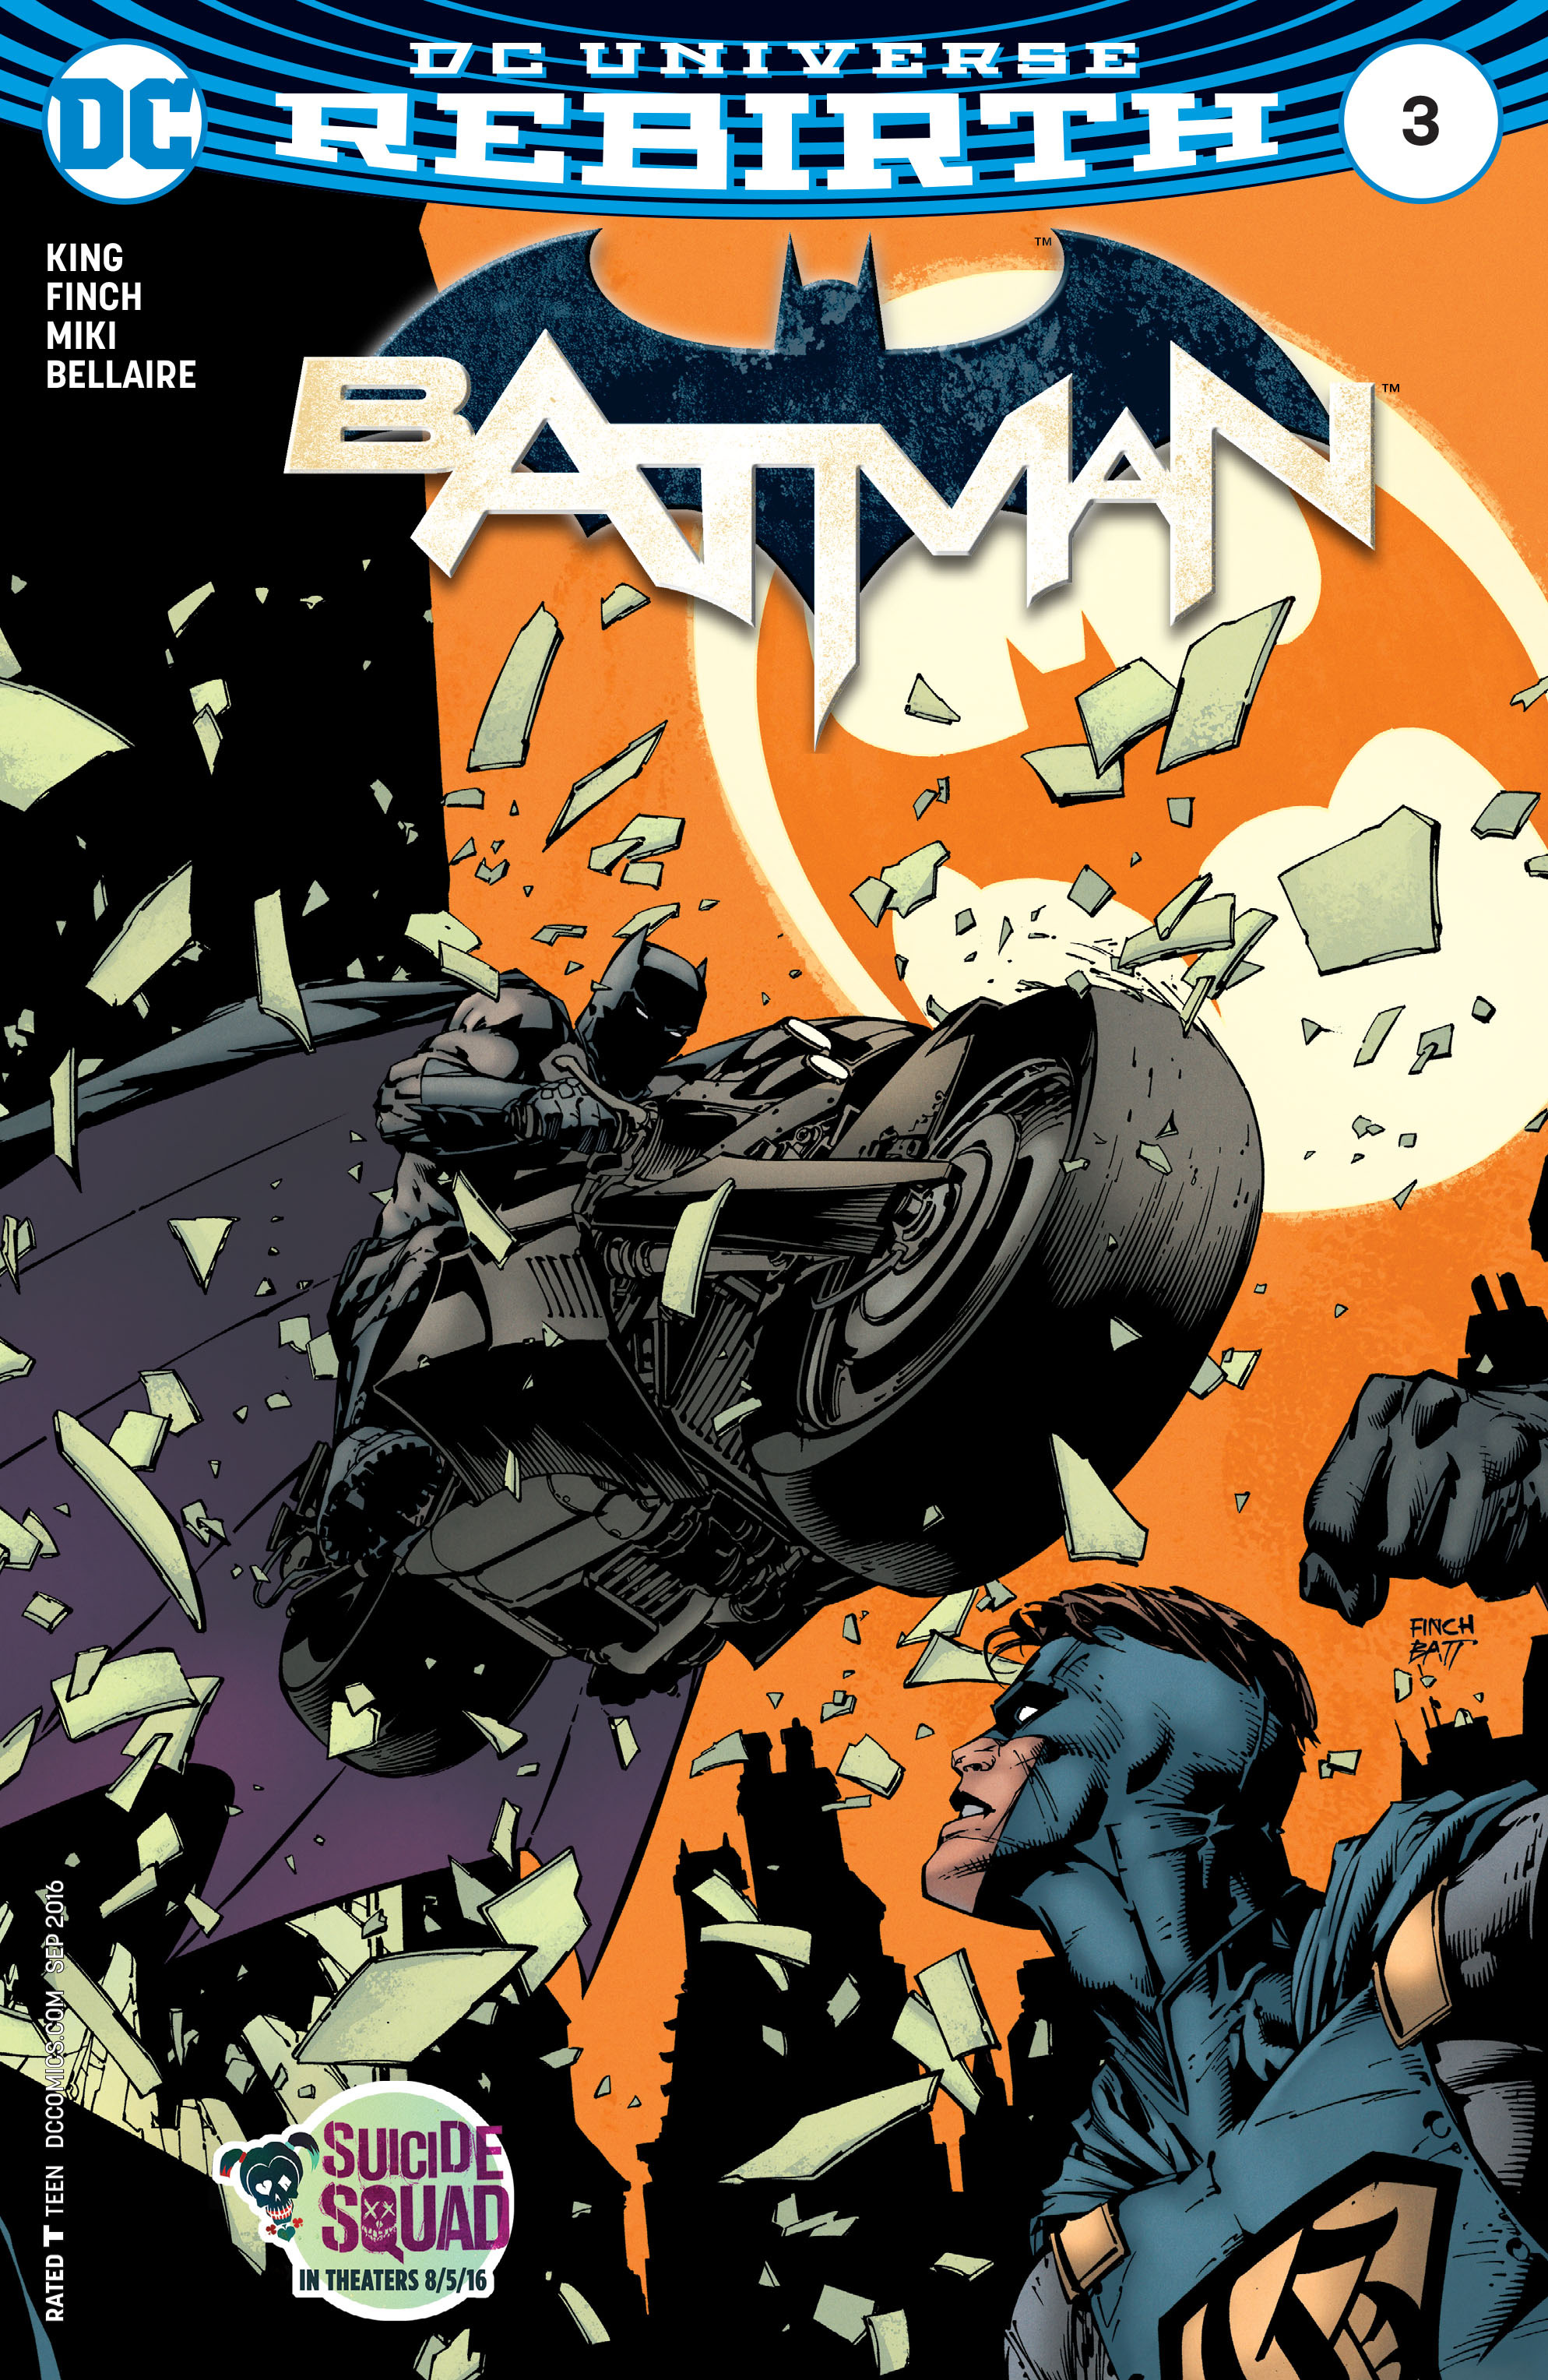 Batman 2016 Issue 3 | Read Batman 2016 Issue 3 comic online in high  quality. Read Full Comic online for free - Read comics online in high  quality .|